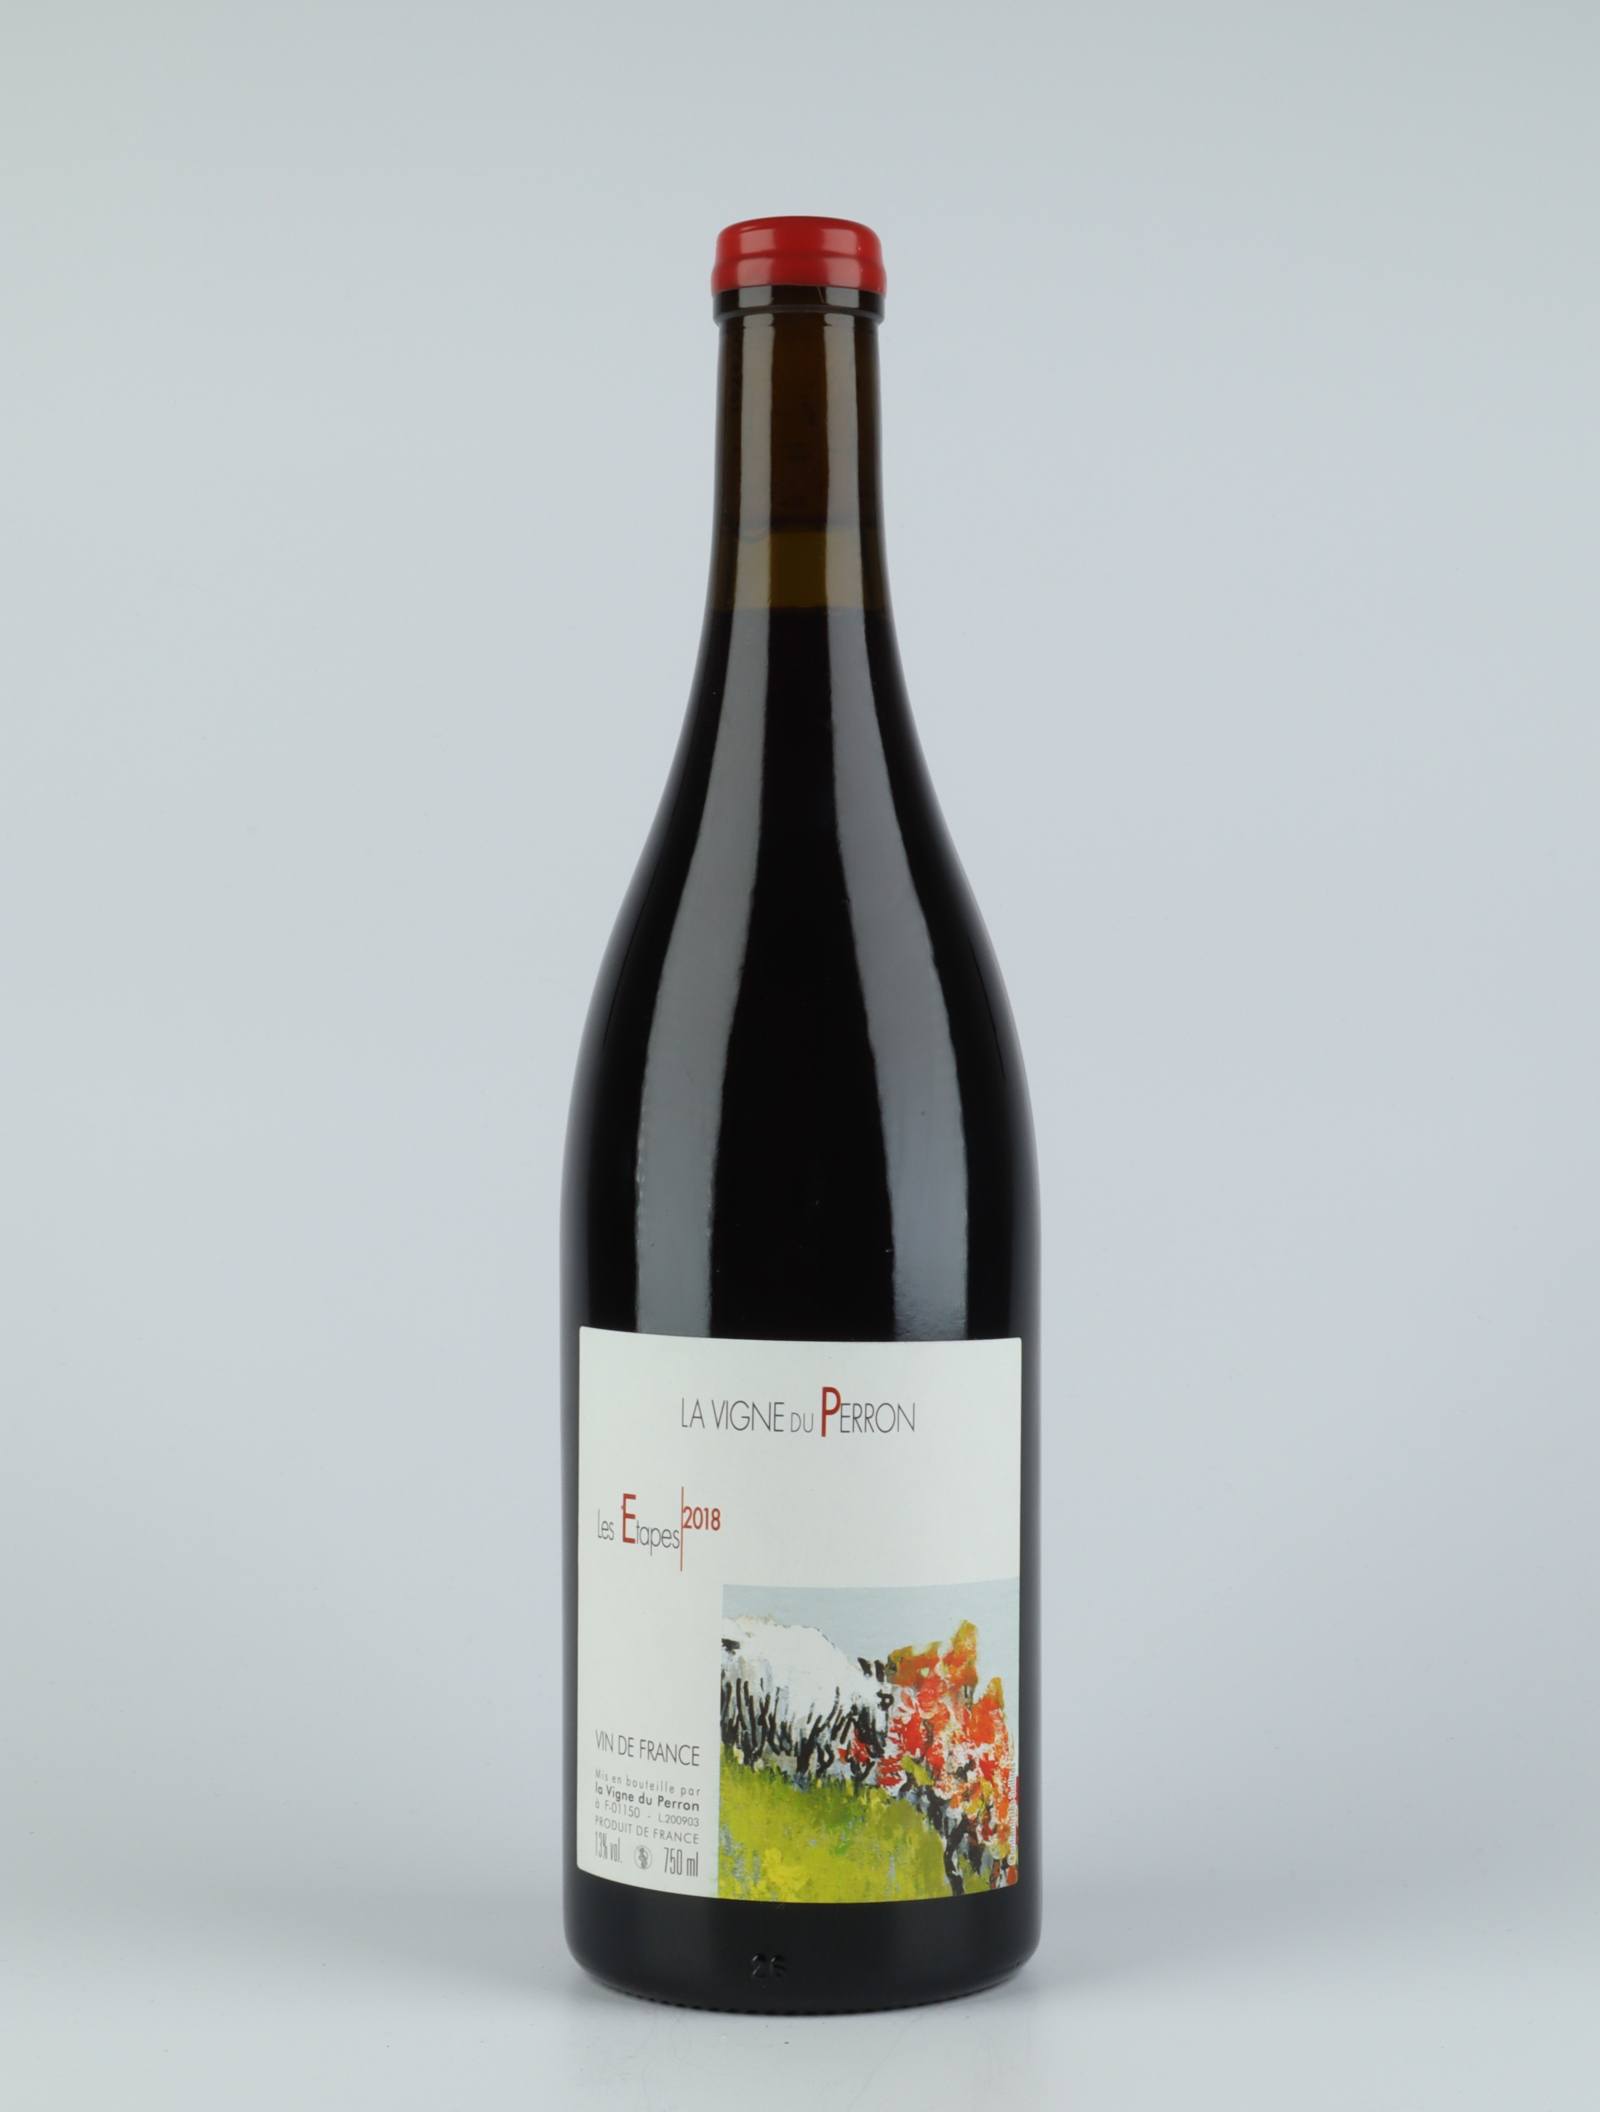 A bottle 2018 Etapes Red wine from Domaine du Perron, Bugey in France